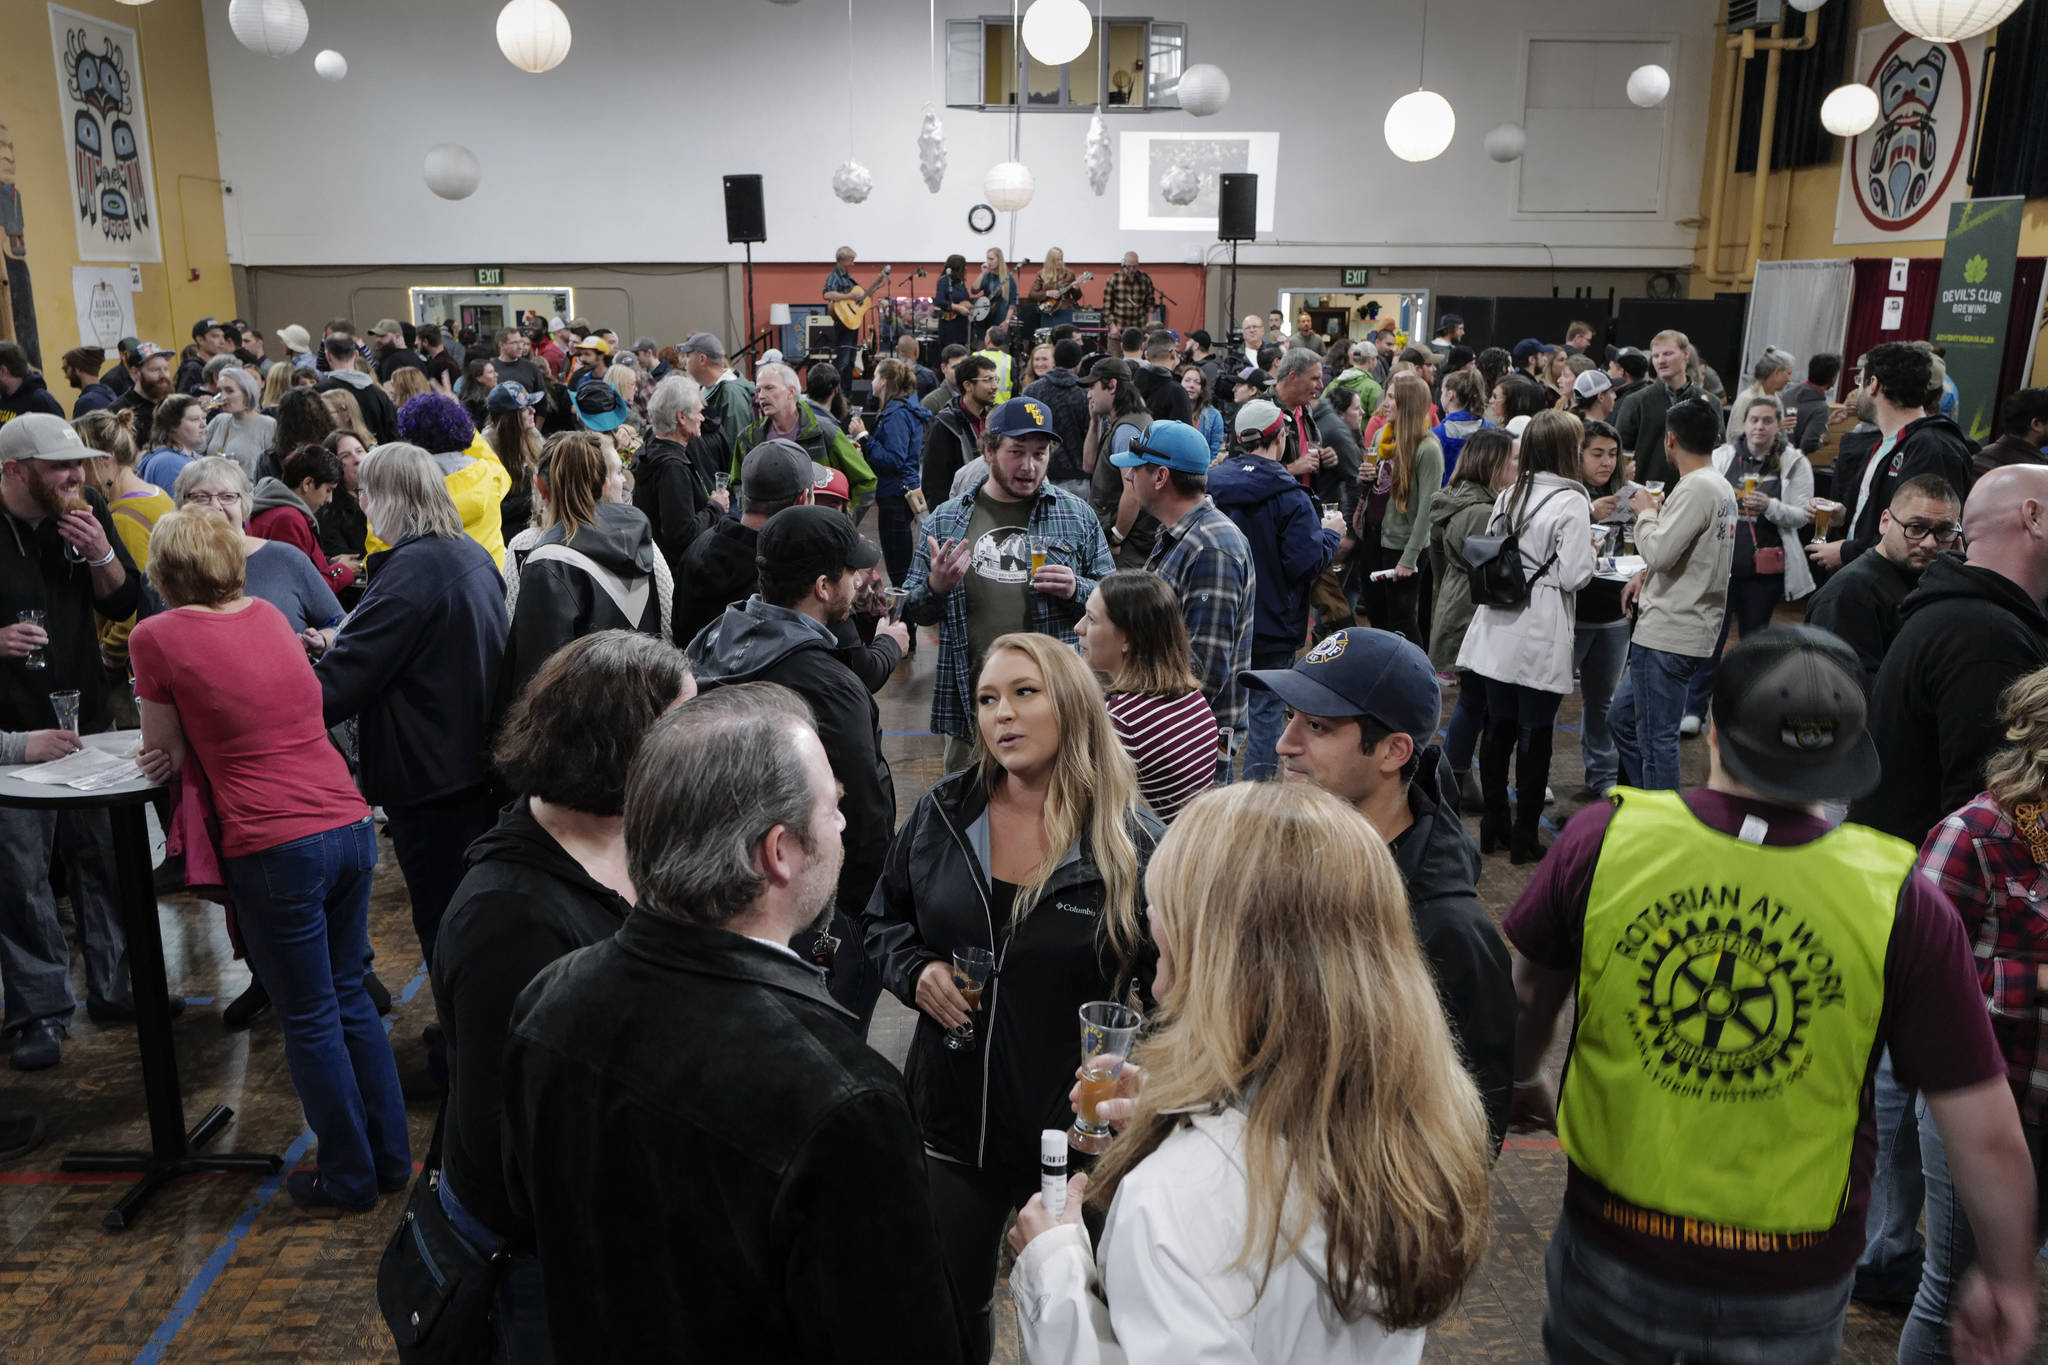 Juneau residents turn out for the Rotary Club of Juneau’s 8th Annual Capital Brewfest at the Juneau Arts and Culture Center on Saturday, Sept. 21, 2019. Twenty brewing and distribution companies were on hand for the fundraiser to benefit the University of Alaska and Rotary’s service projects, scholarships, international youth exchanges and other project. The event was sold out with 900 tickets sold. (Michael Penn | Juneau Empire)